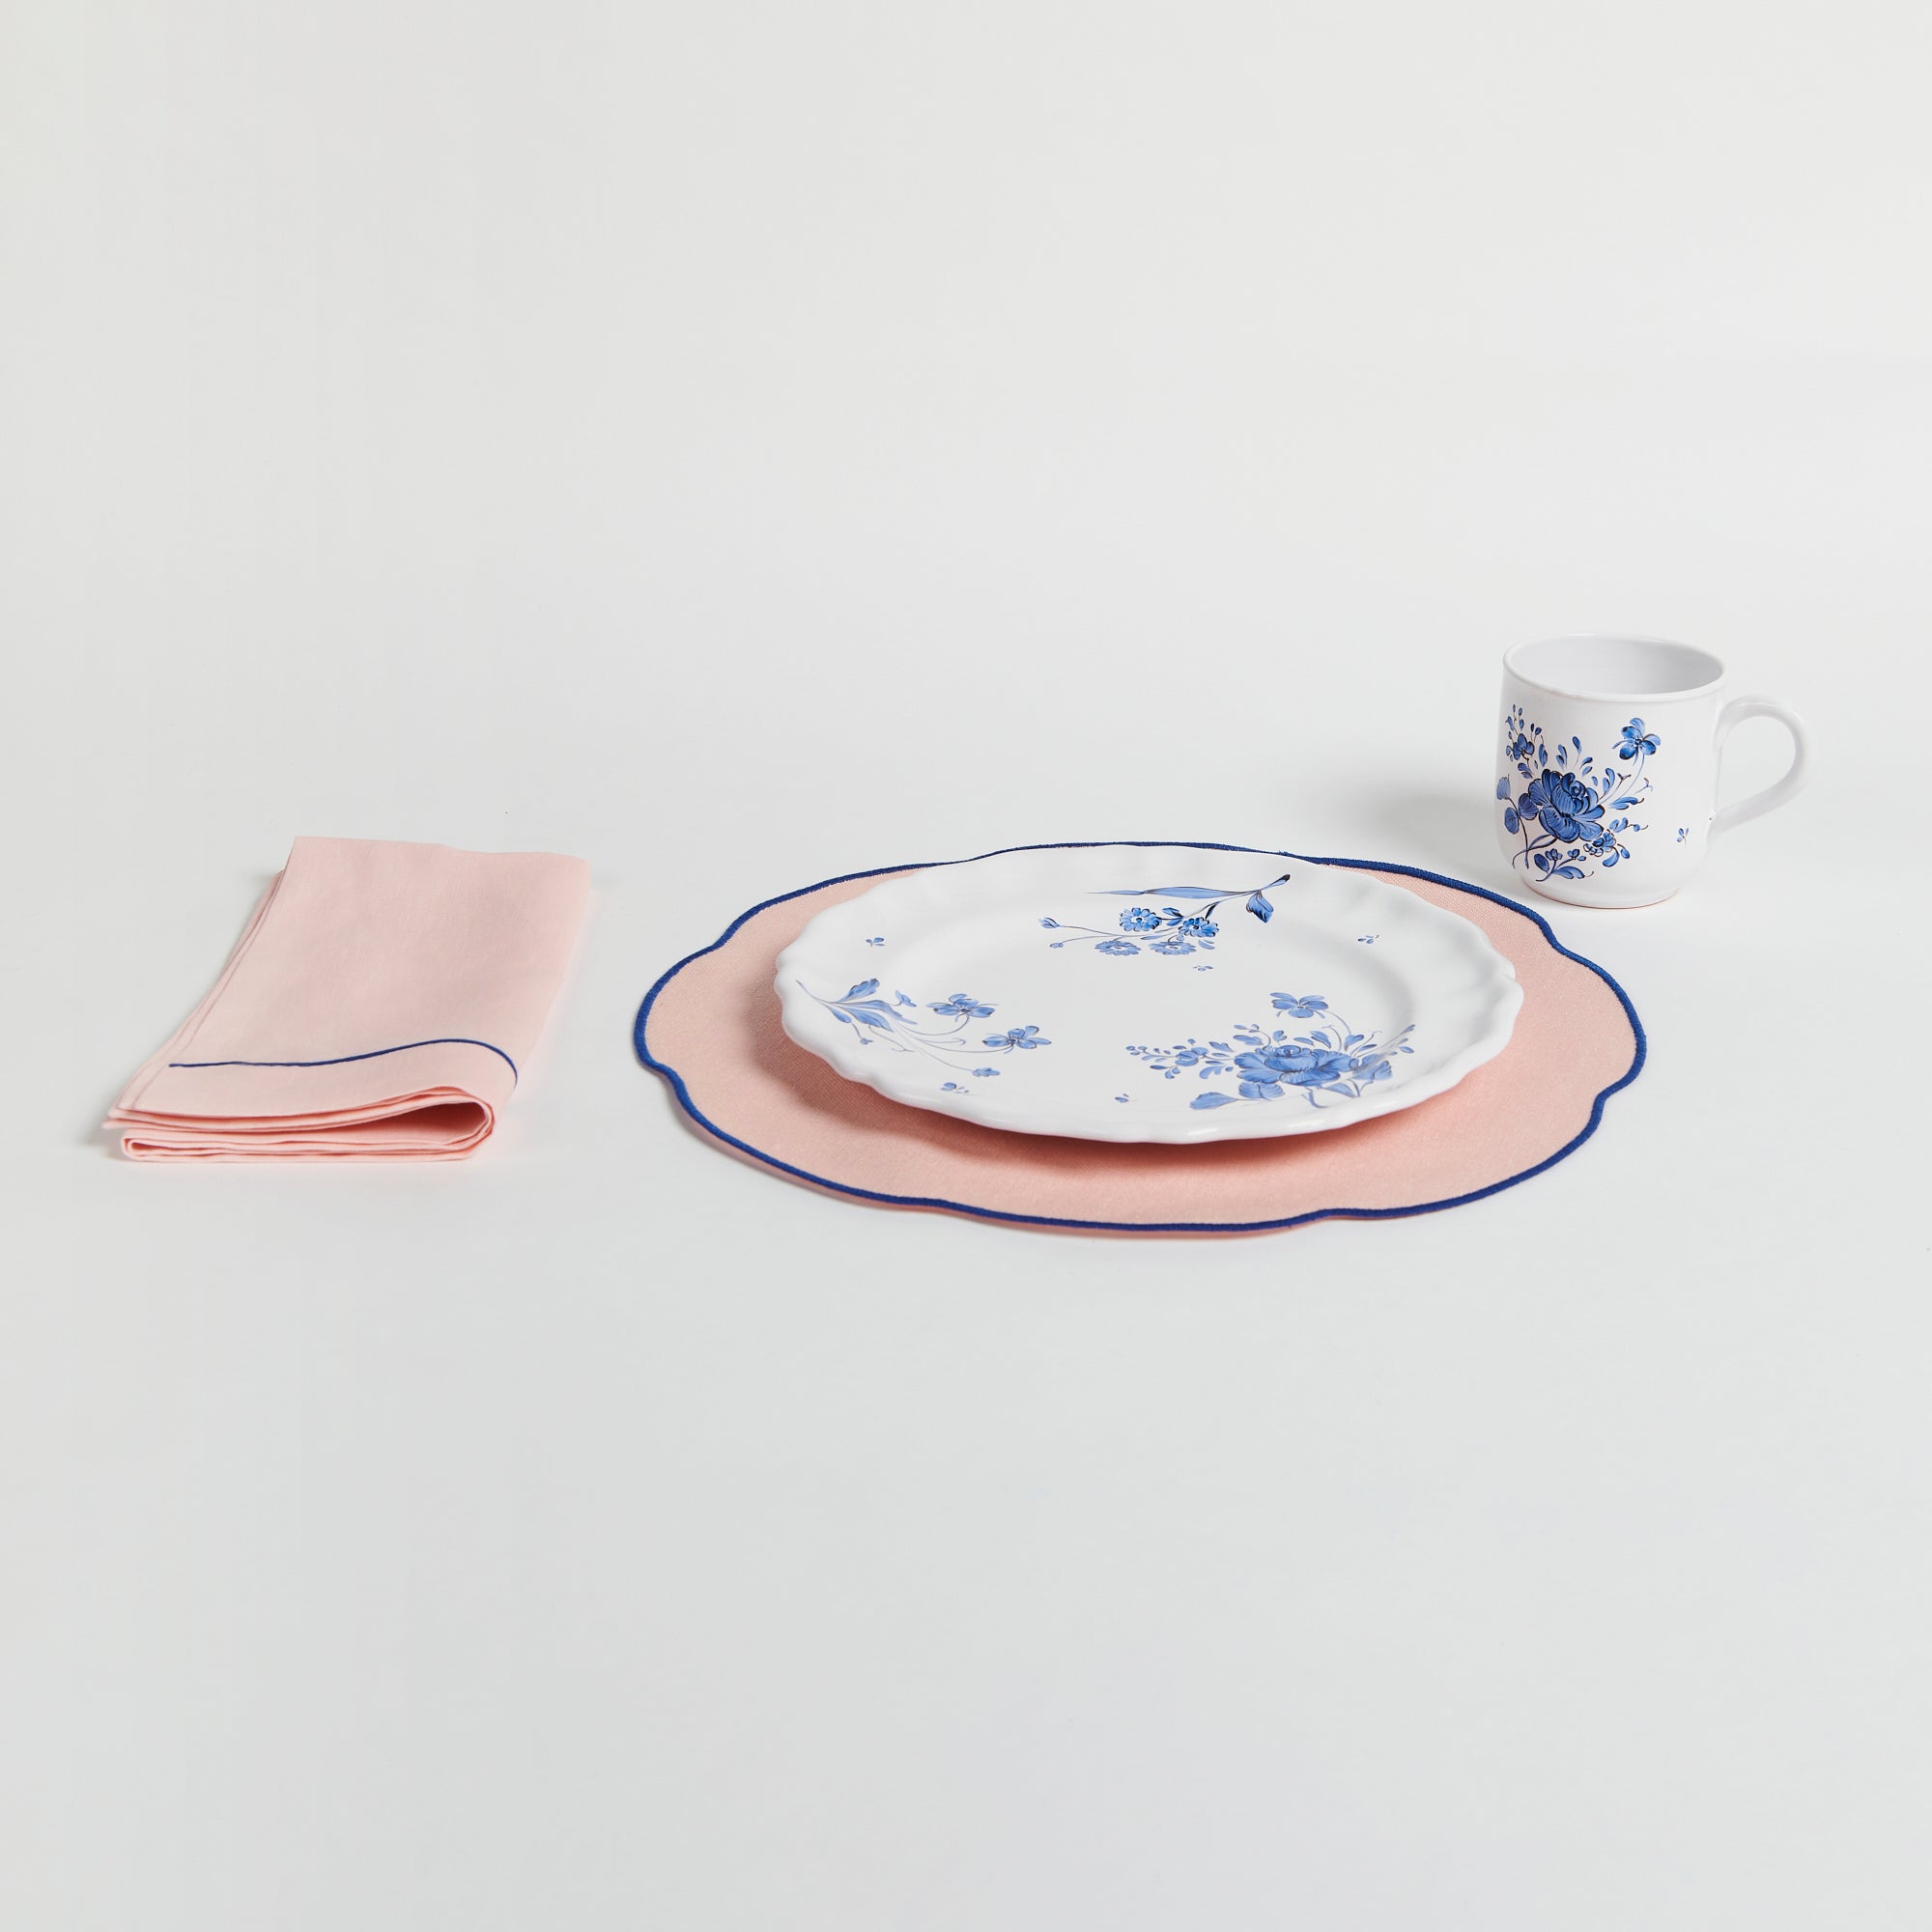 Coated Pink Linen Placemat, Blue